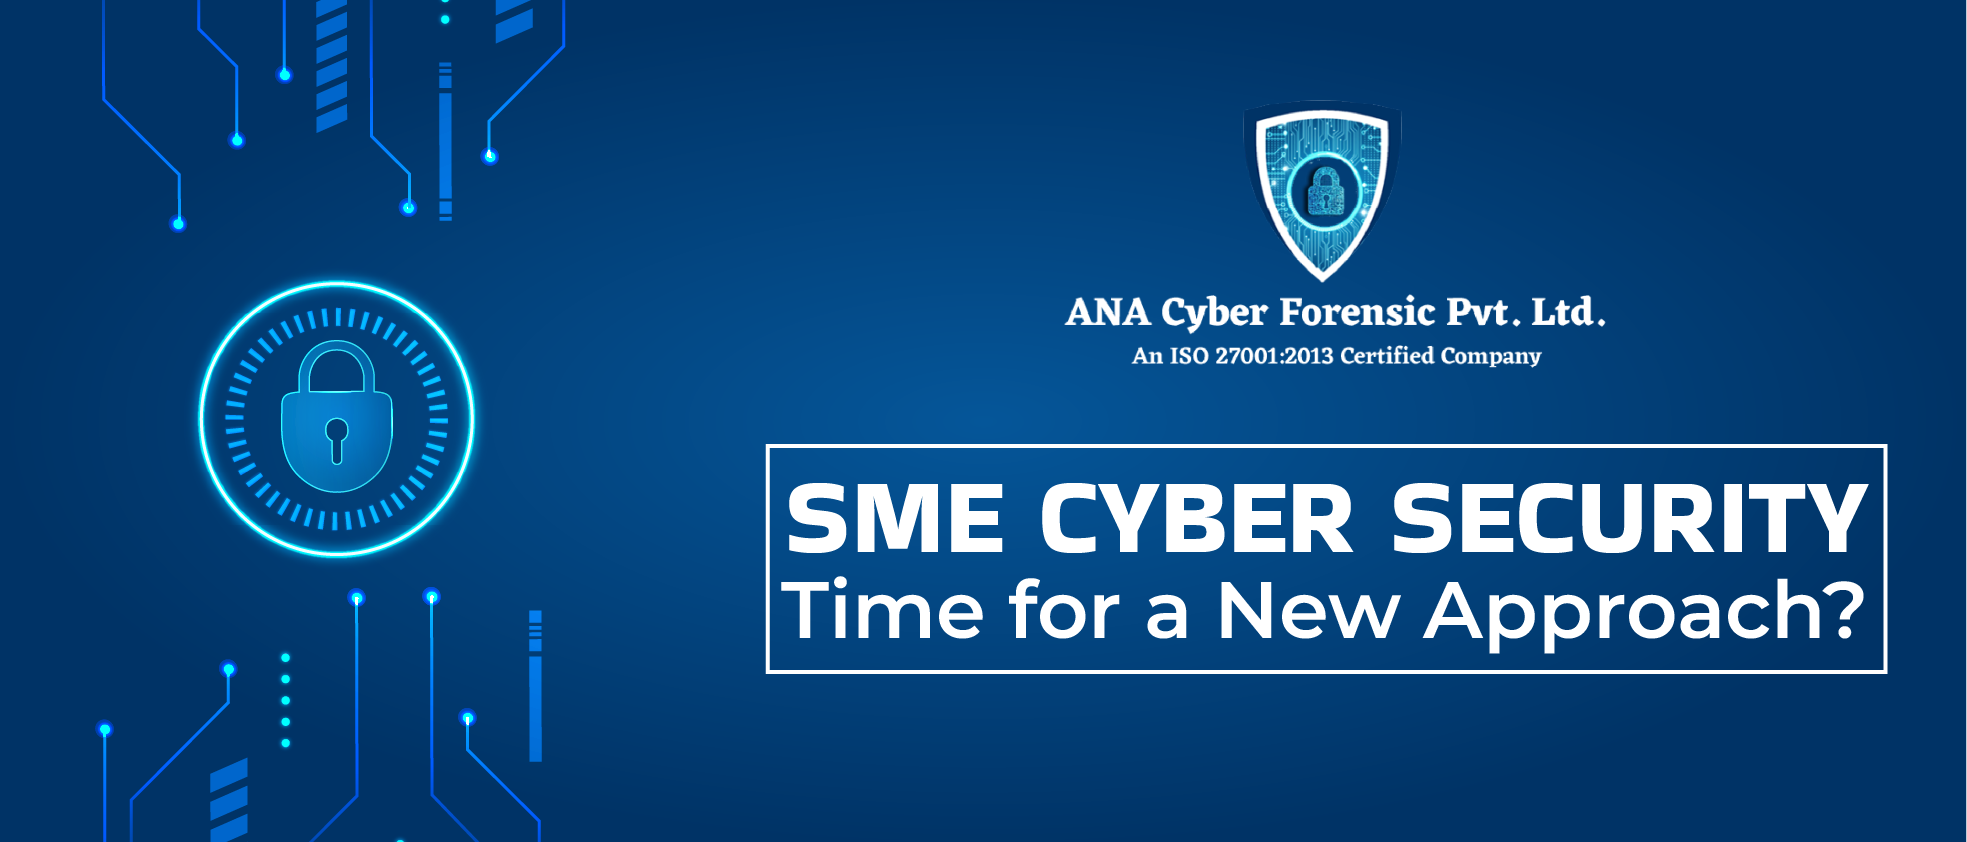 SME Cyber Security – Time for a New Approach?